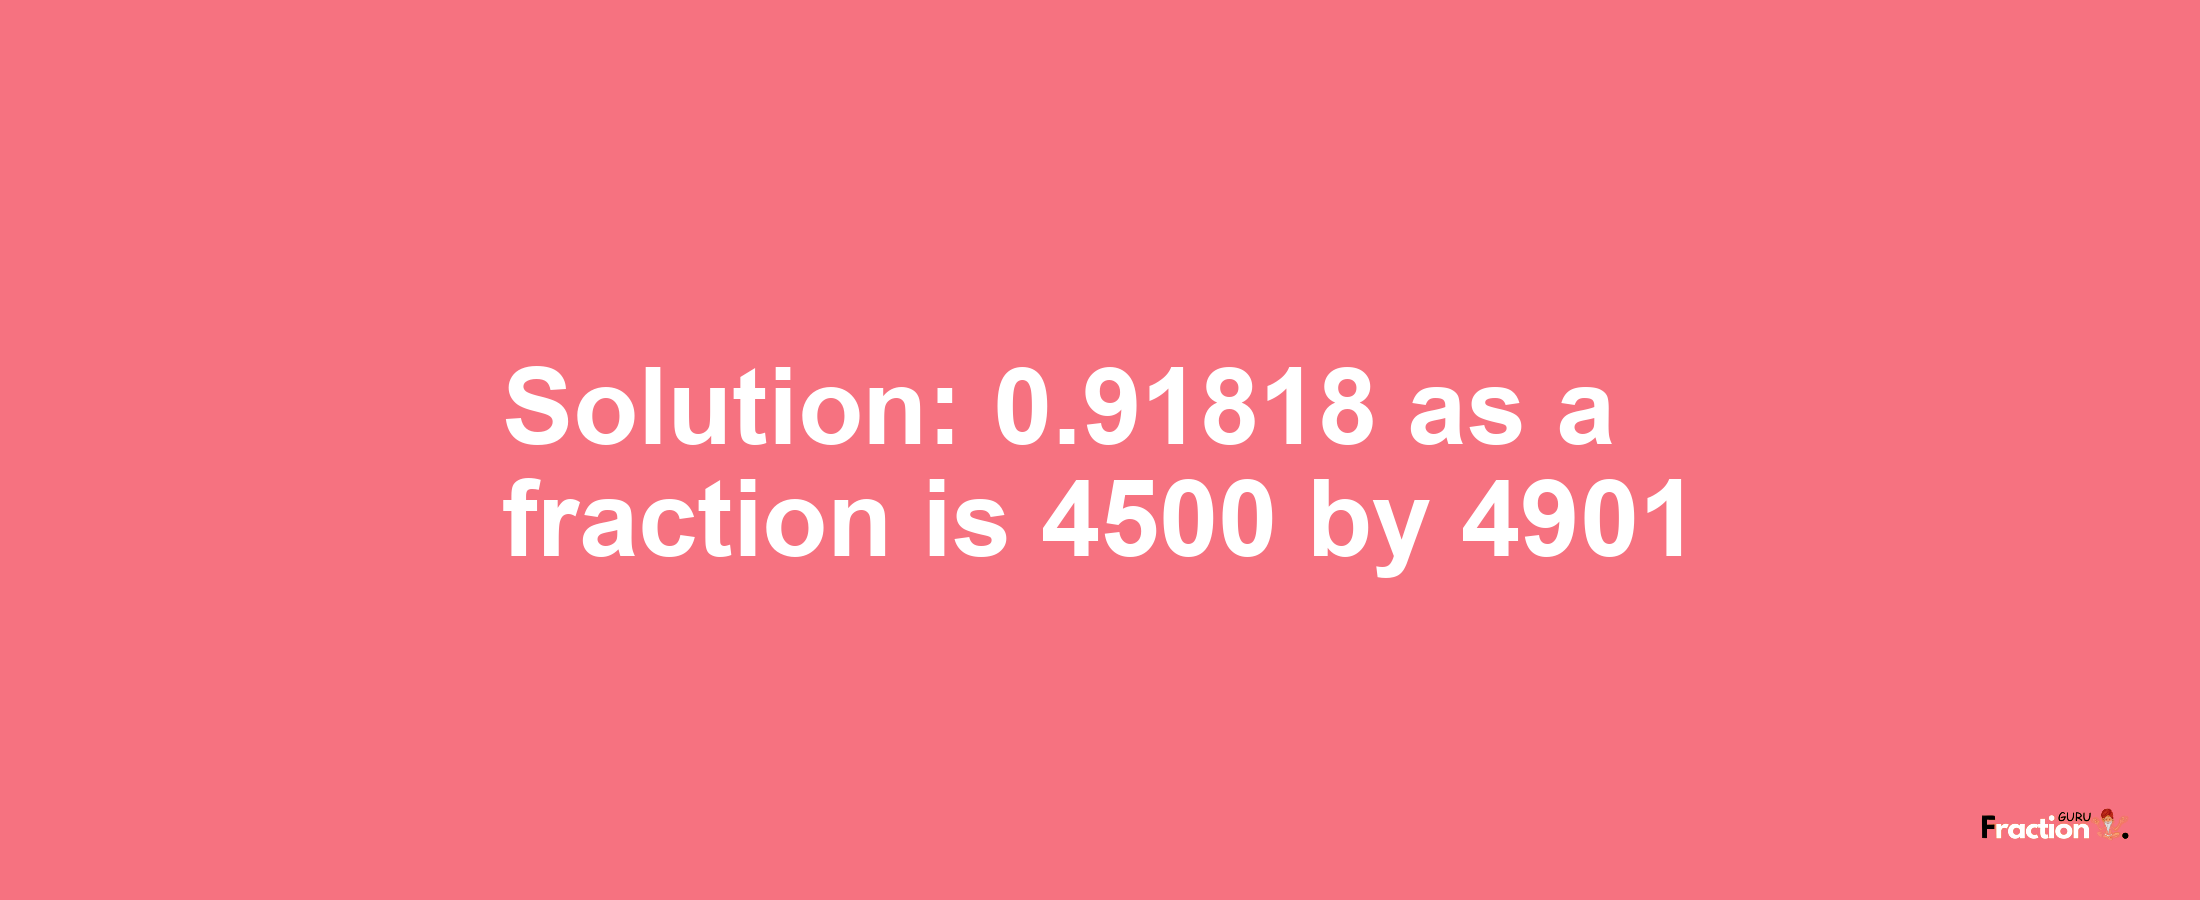 Solution:0.91818 as a fraction is 4500/4901